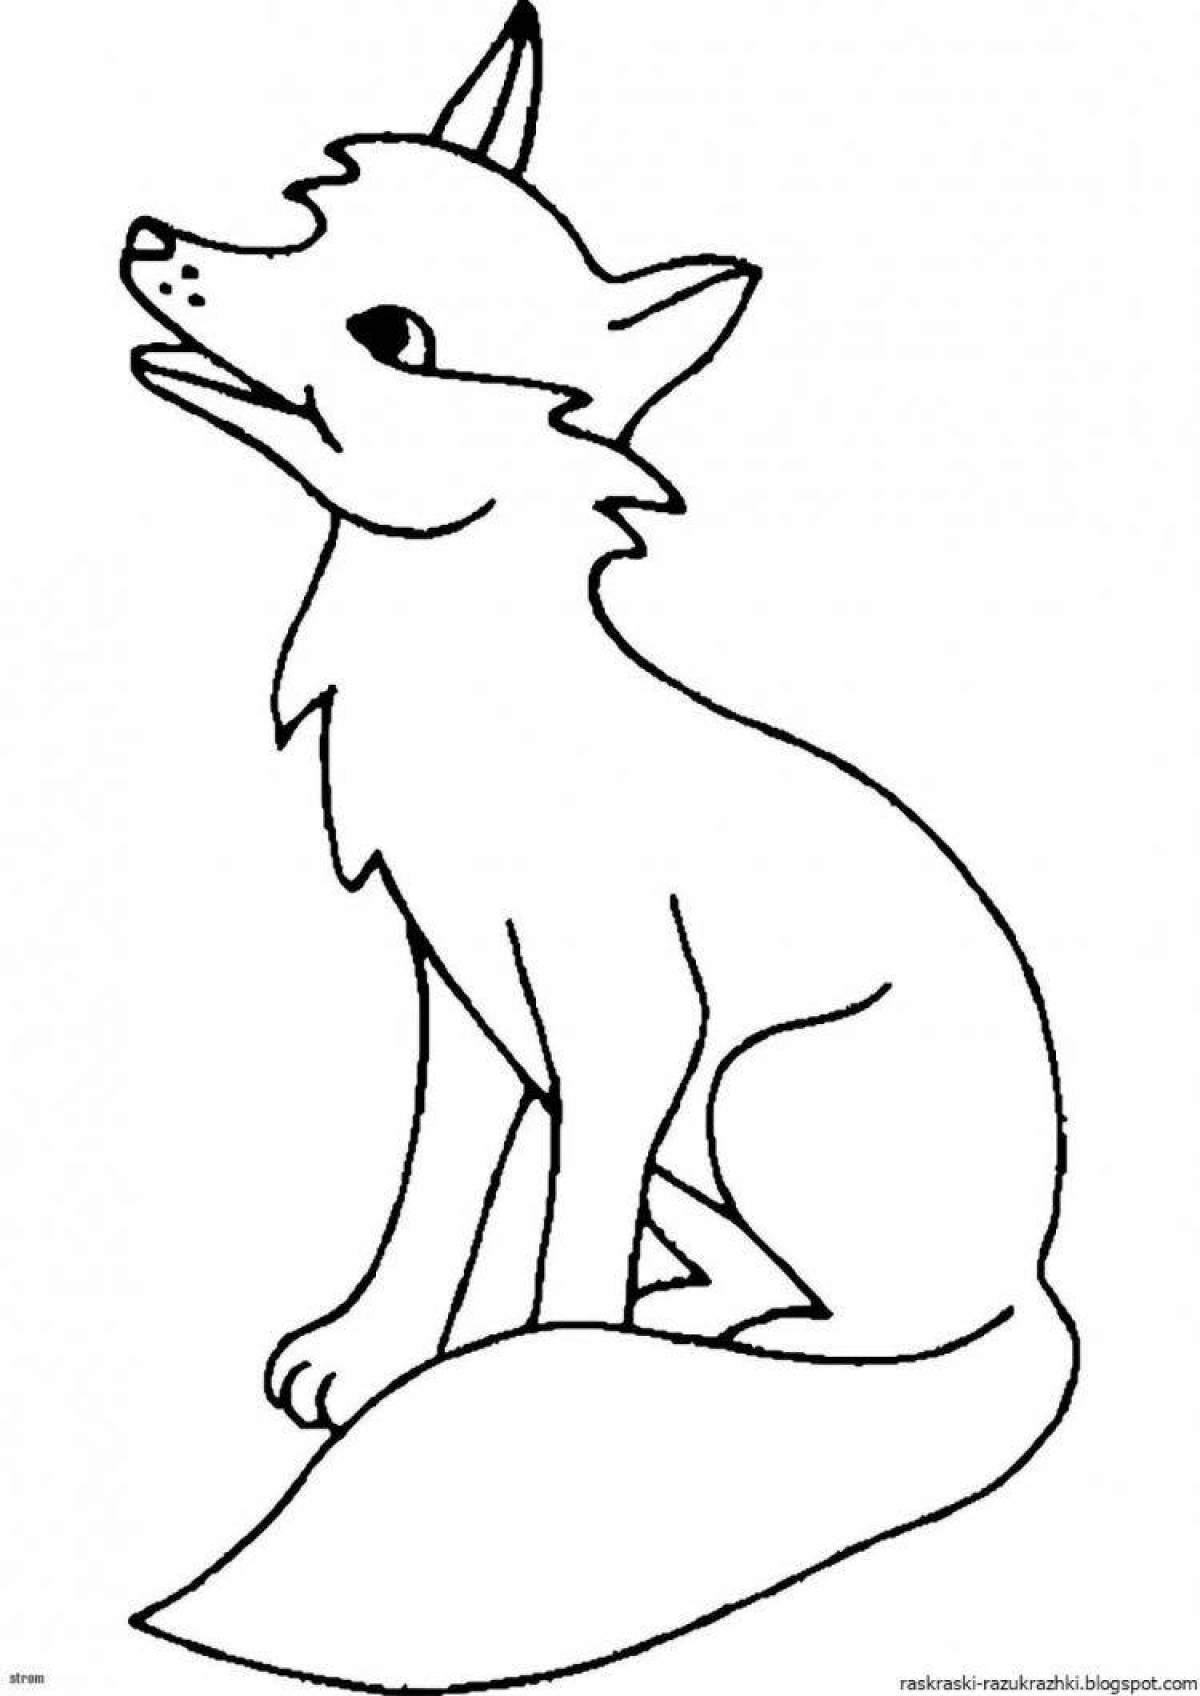 Colouring funny fox for children 6-7 years old